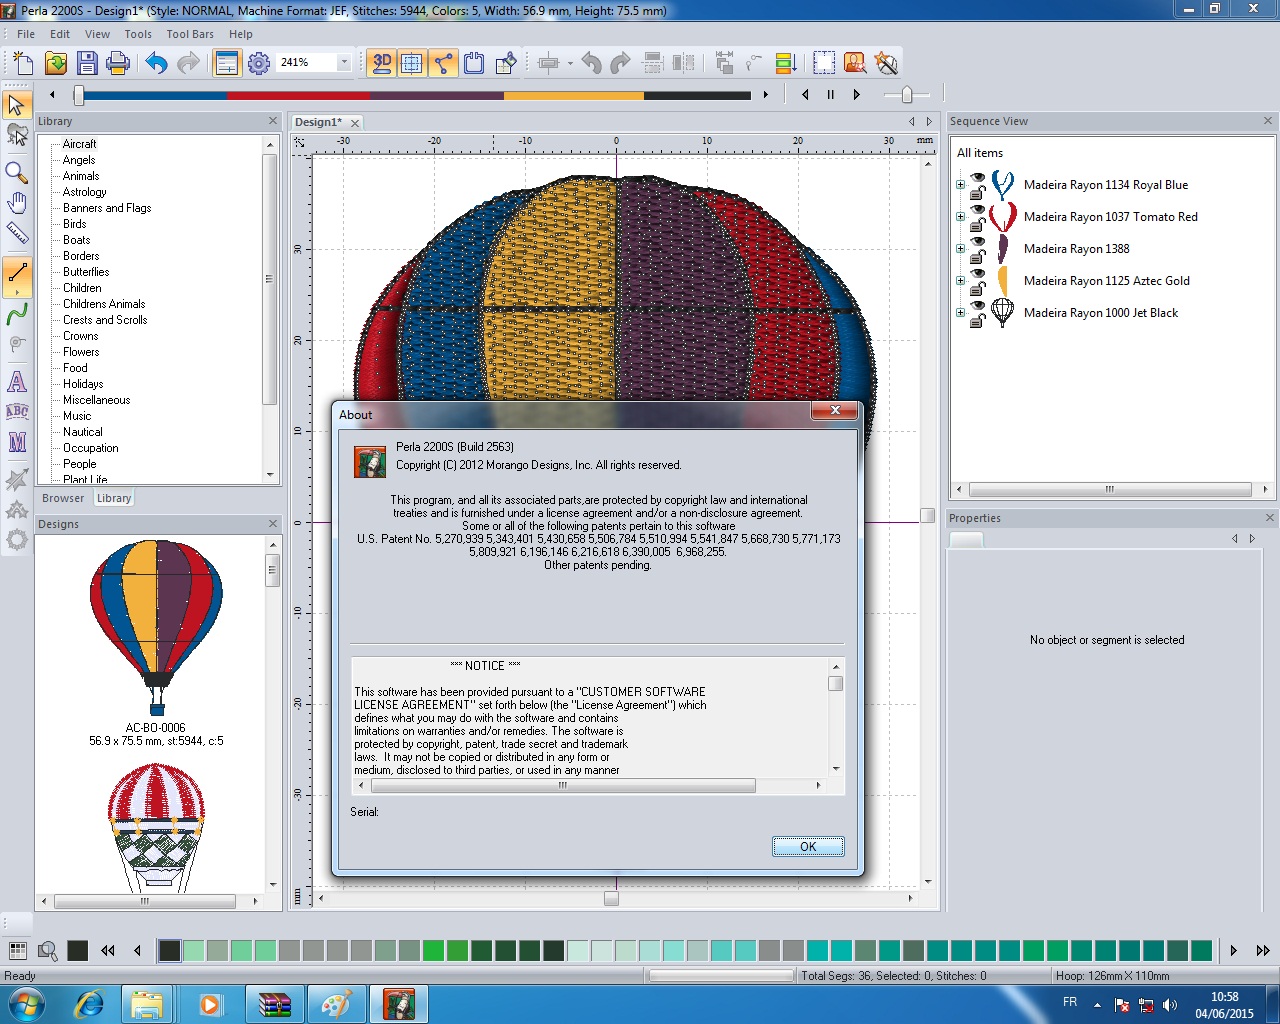 Courselab 2.7. Full Version Downloads